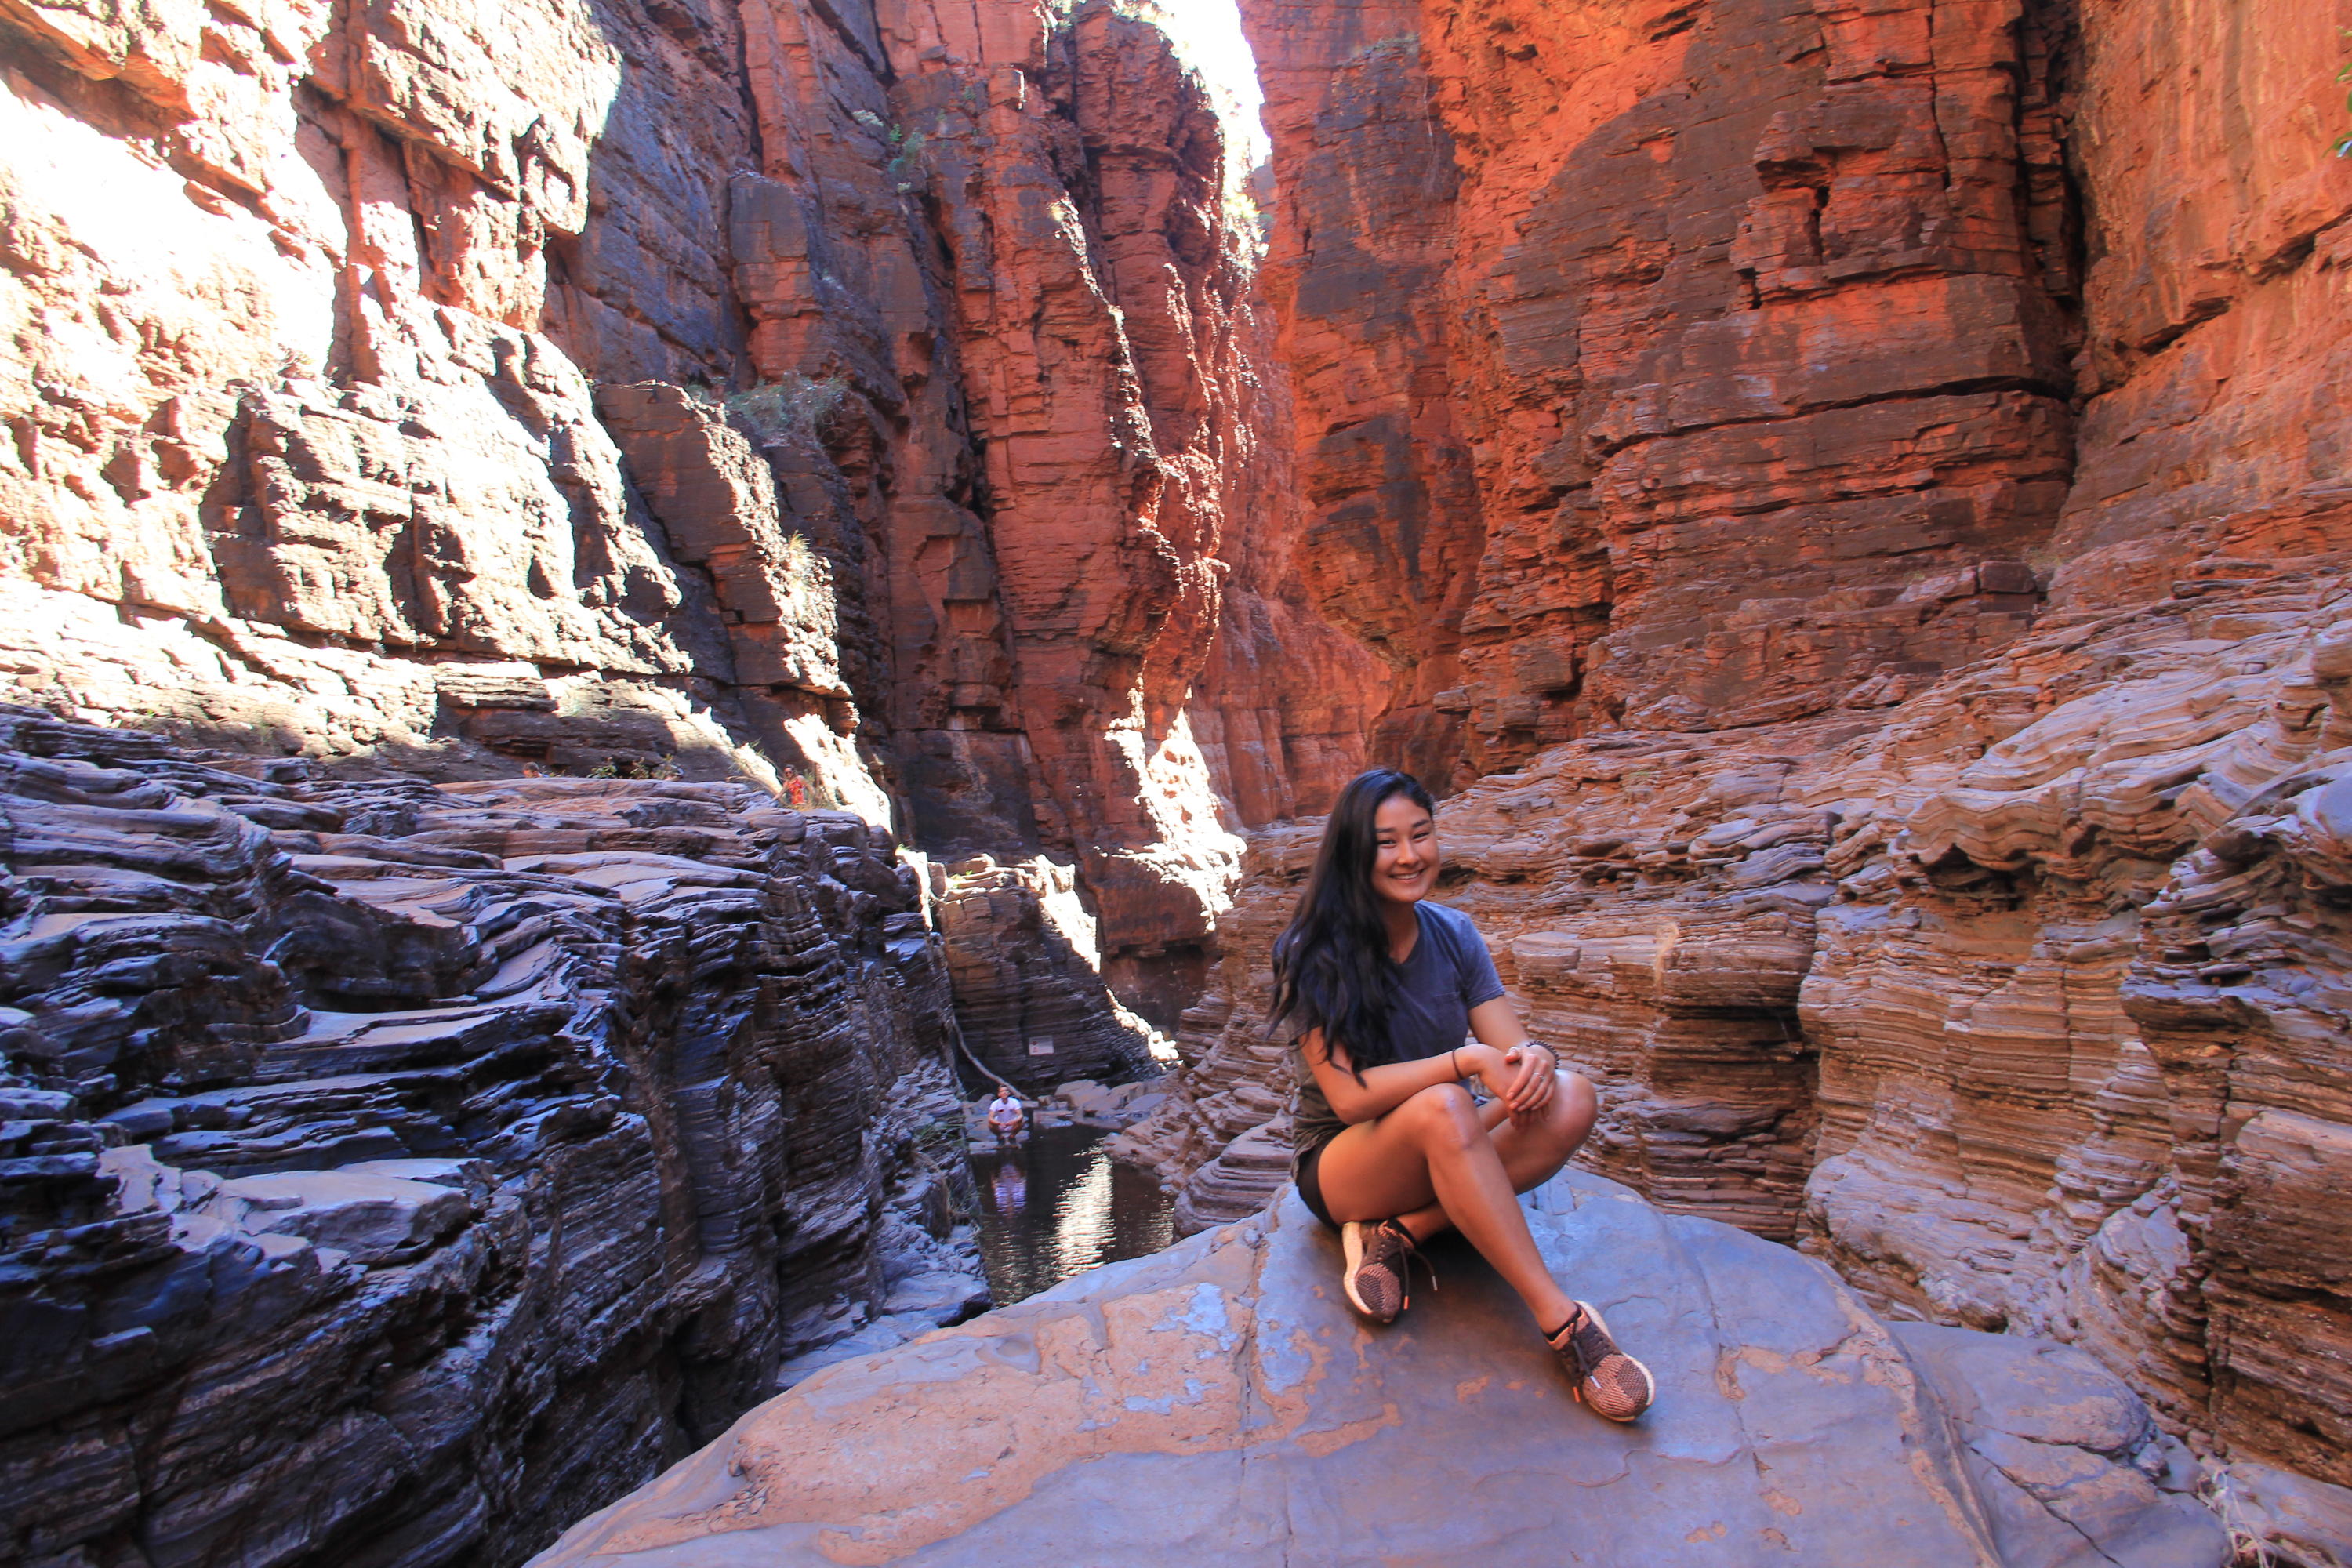 Cyanne seated at the base of a large gorge.